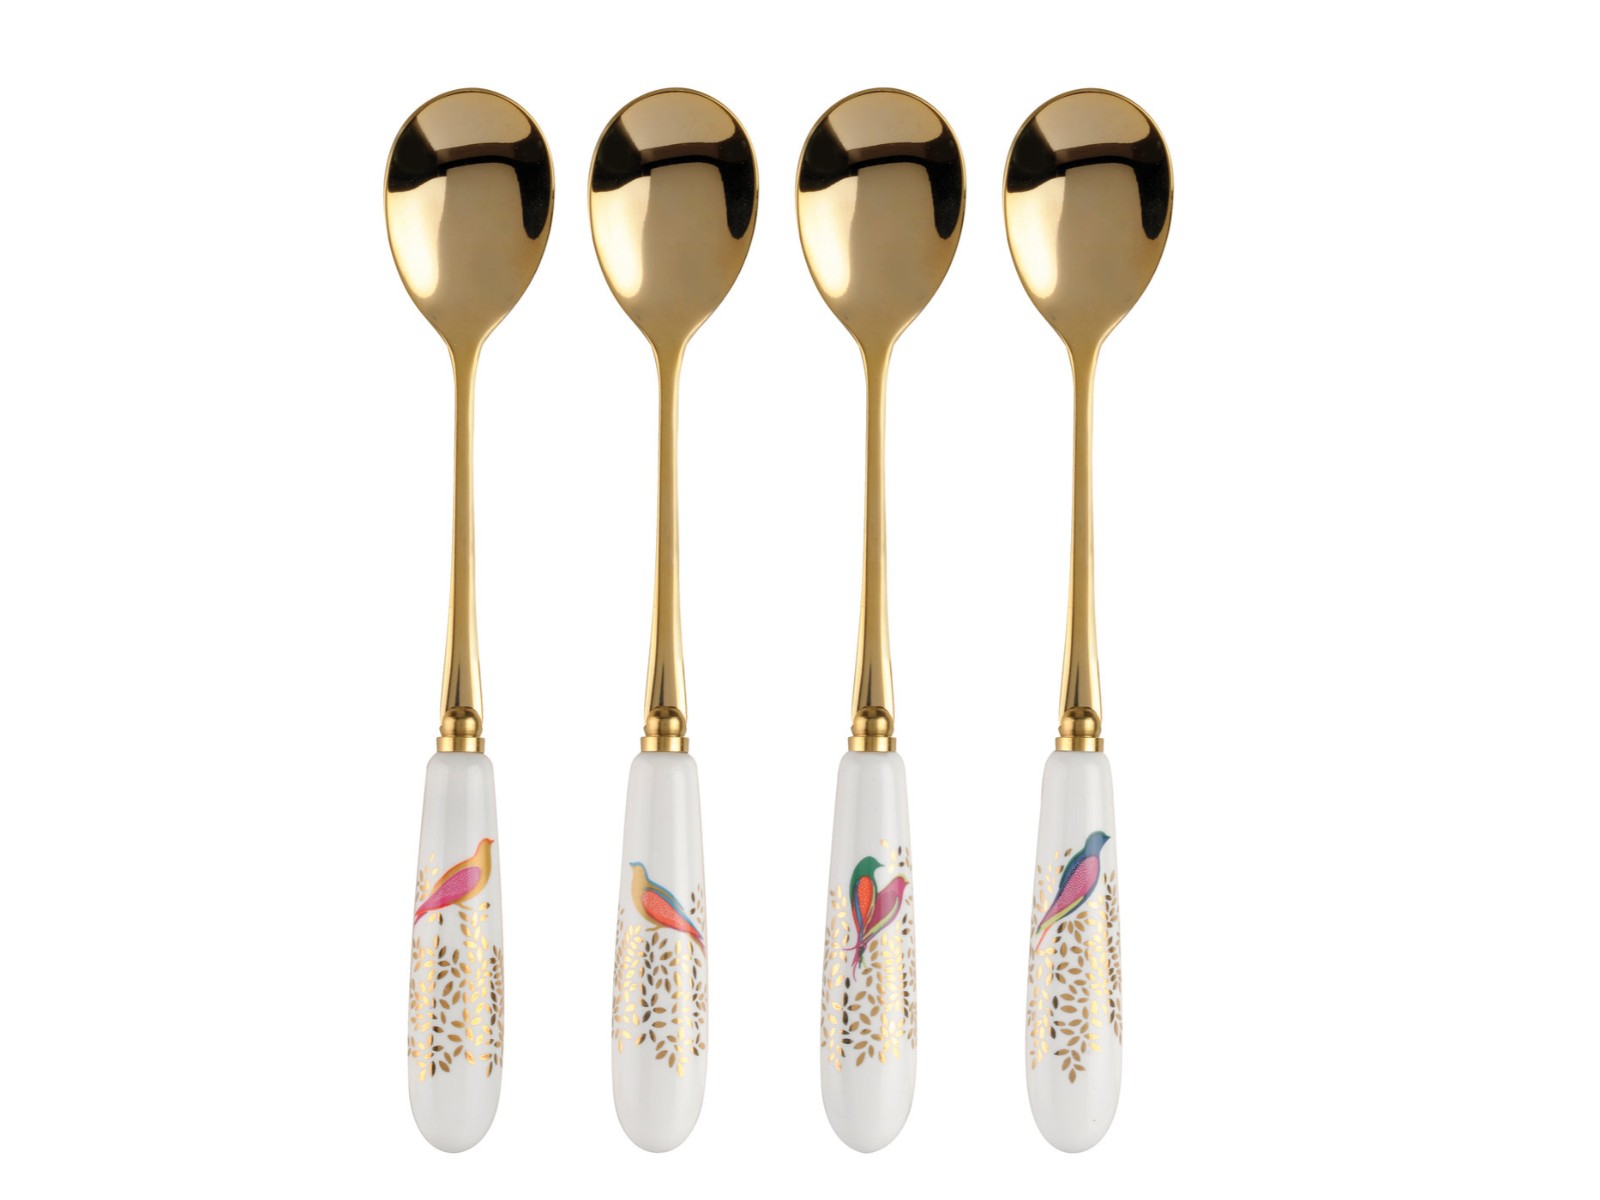 A set of four gold teaspoons with white porcelain handles, decorated with gold leaves and brightly coloured birds